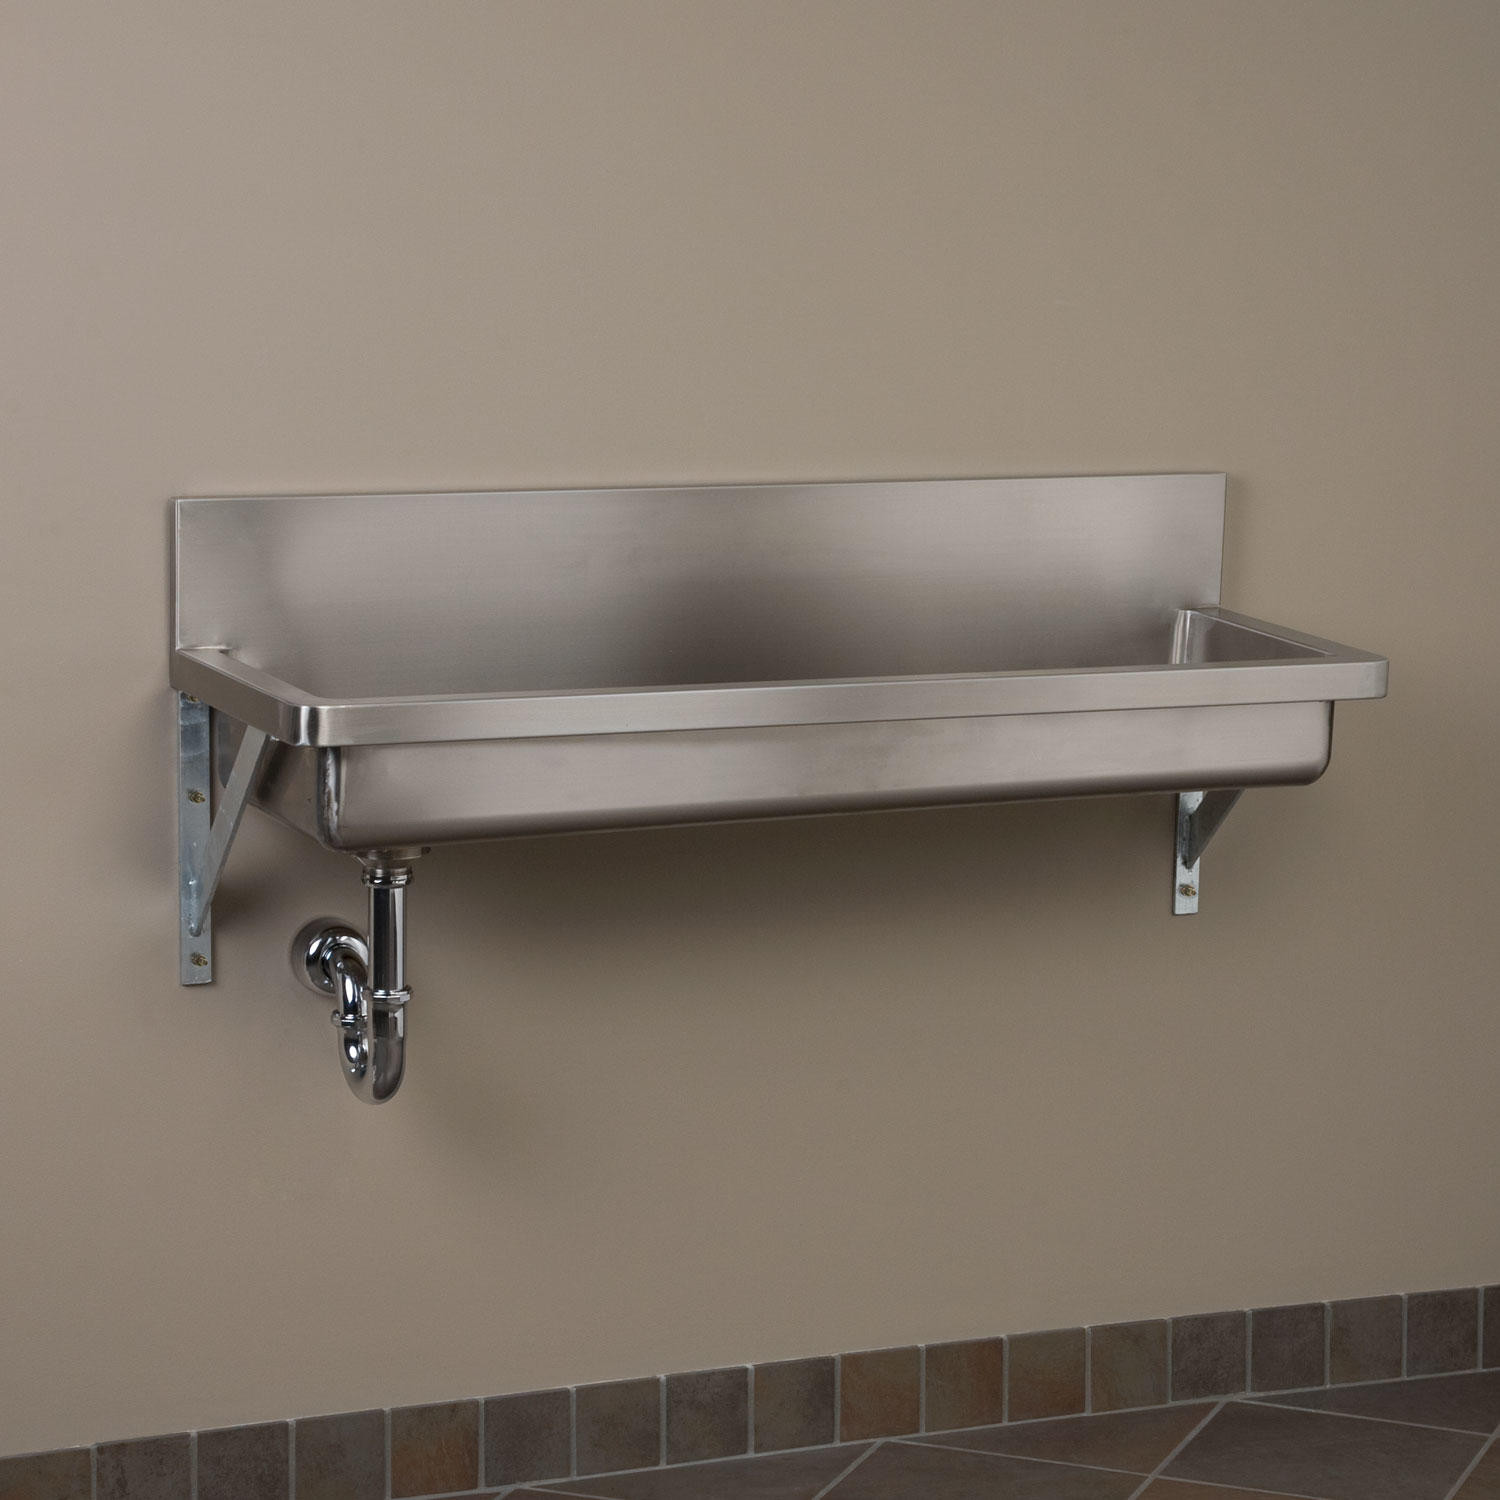 Wall Mount Kitchen Sinks
 Stainless Steel Wall Mount mercial Sink Stainless